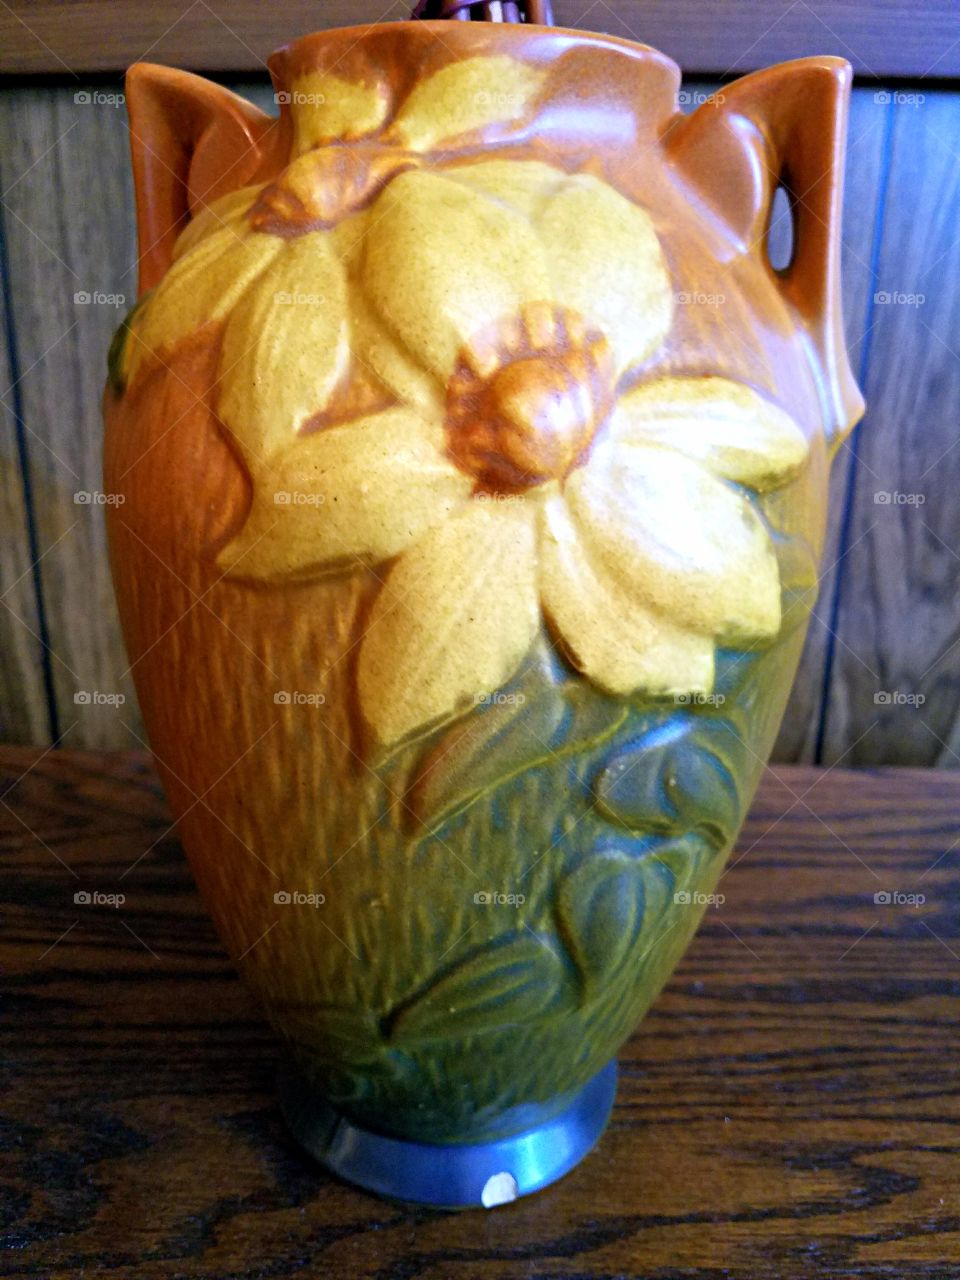 Vintage Handmade Vase with a chip in the base!